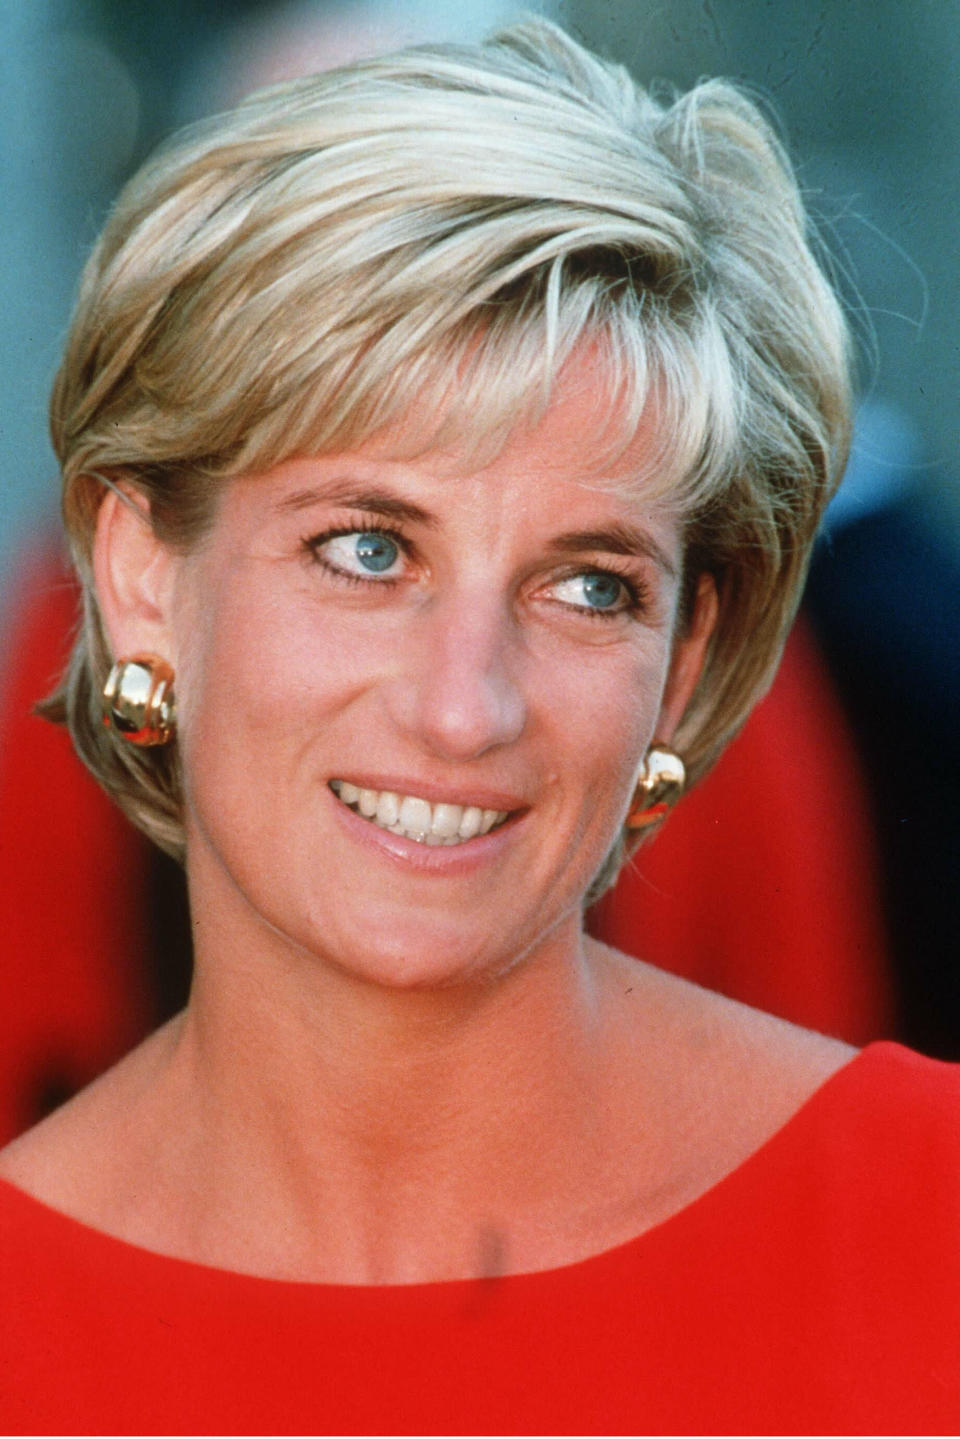 <p>Her last engagement in Britain was at the North Park Children’s A&E Unit on July 21st, 1997. For the occasion, Princess Diana donned a striking red shift dress and sported a shorter hairstyle with bangs. (PA)</p> 